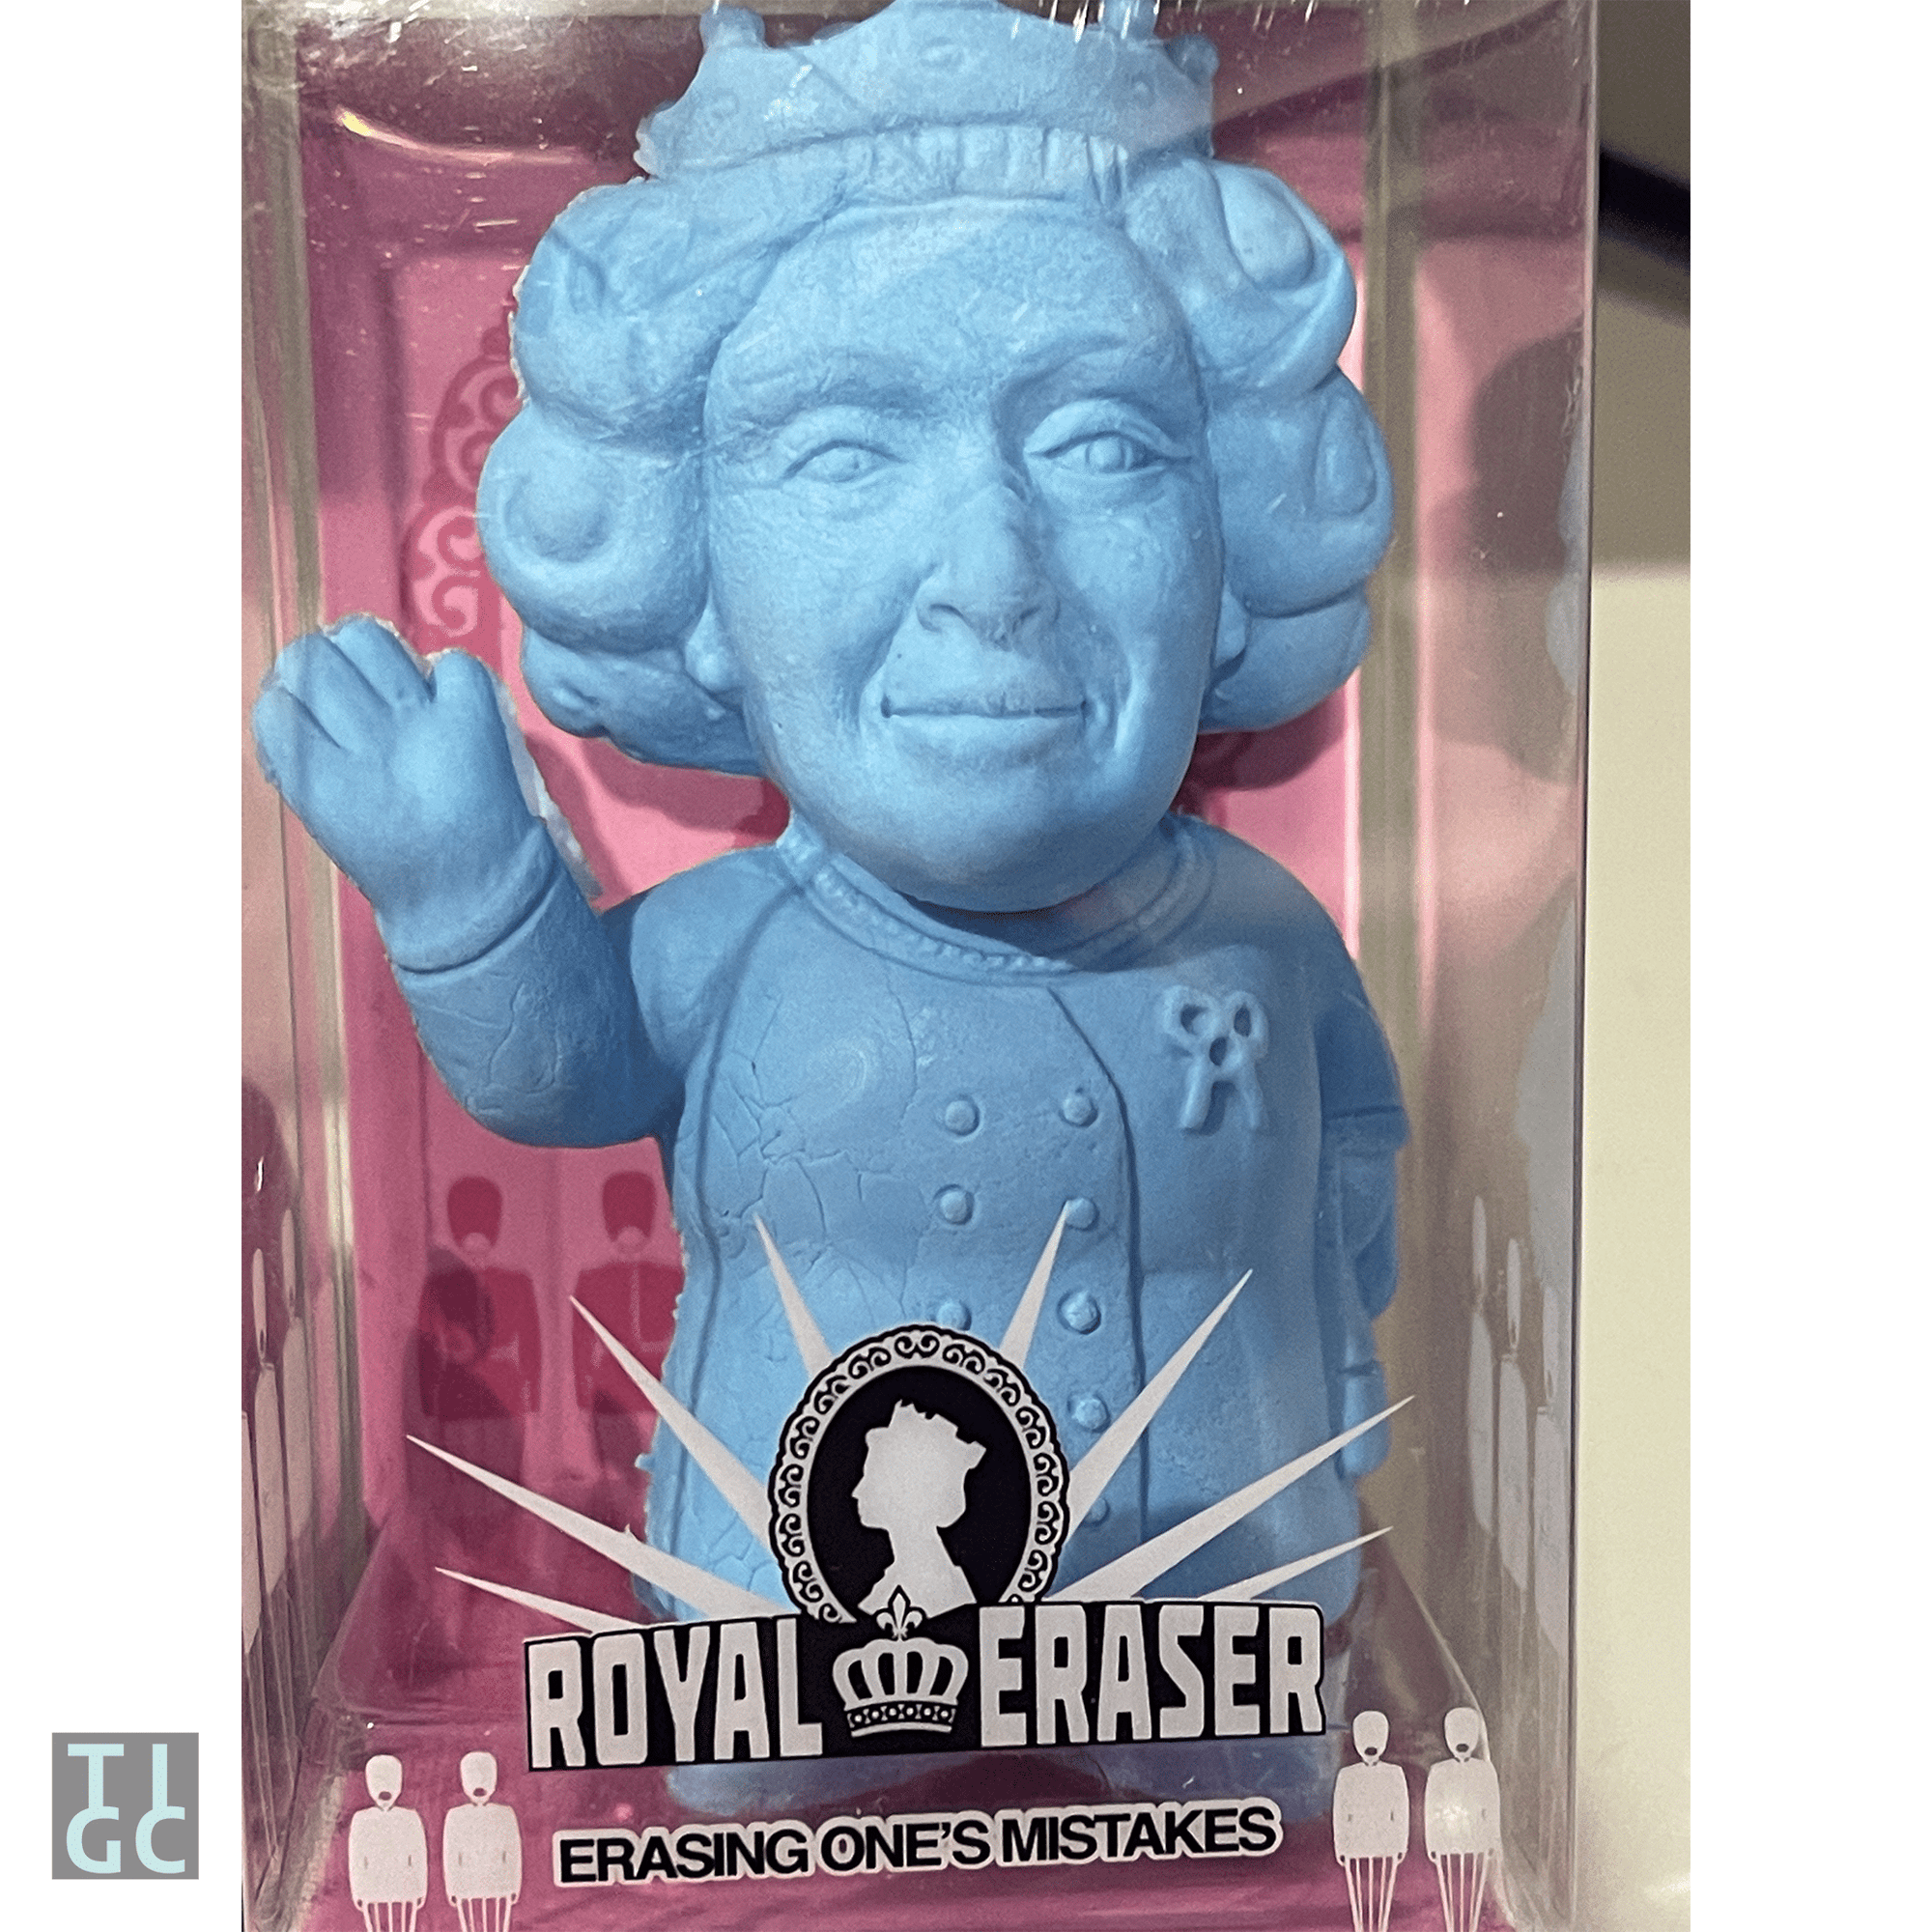 TIGC The Inappropriate Gift Co Queen Eraser